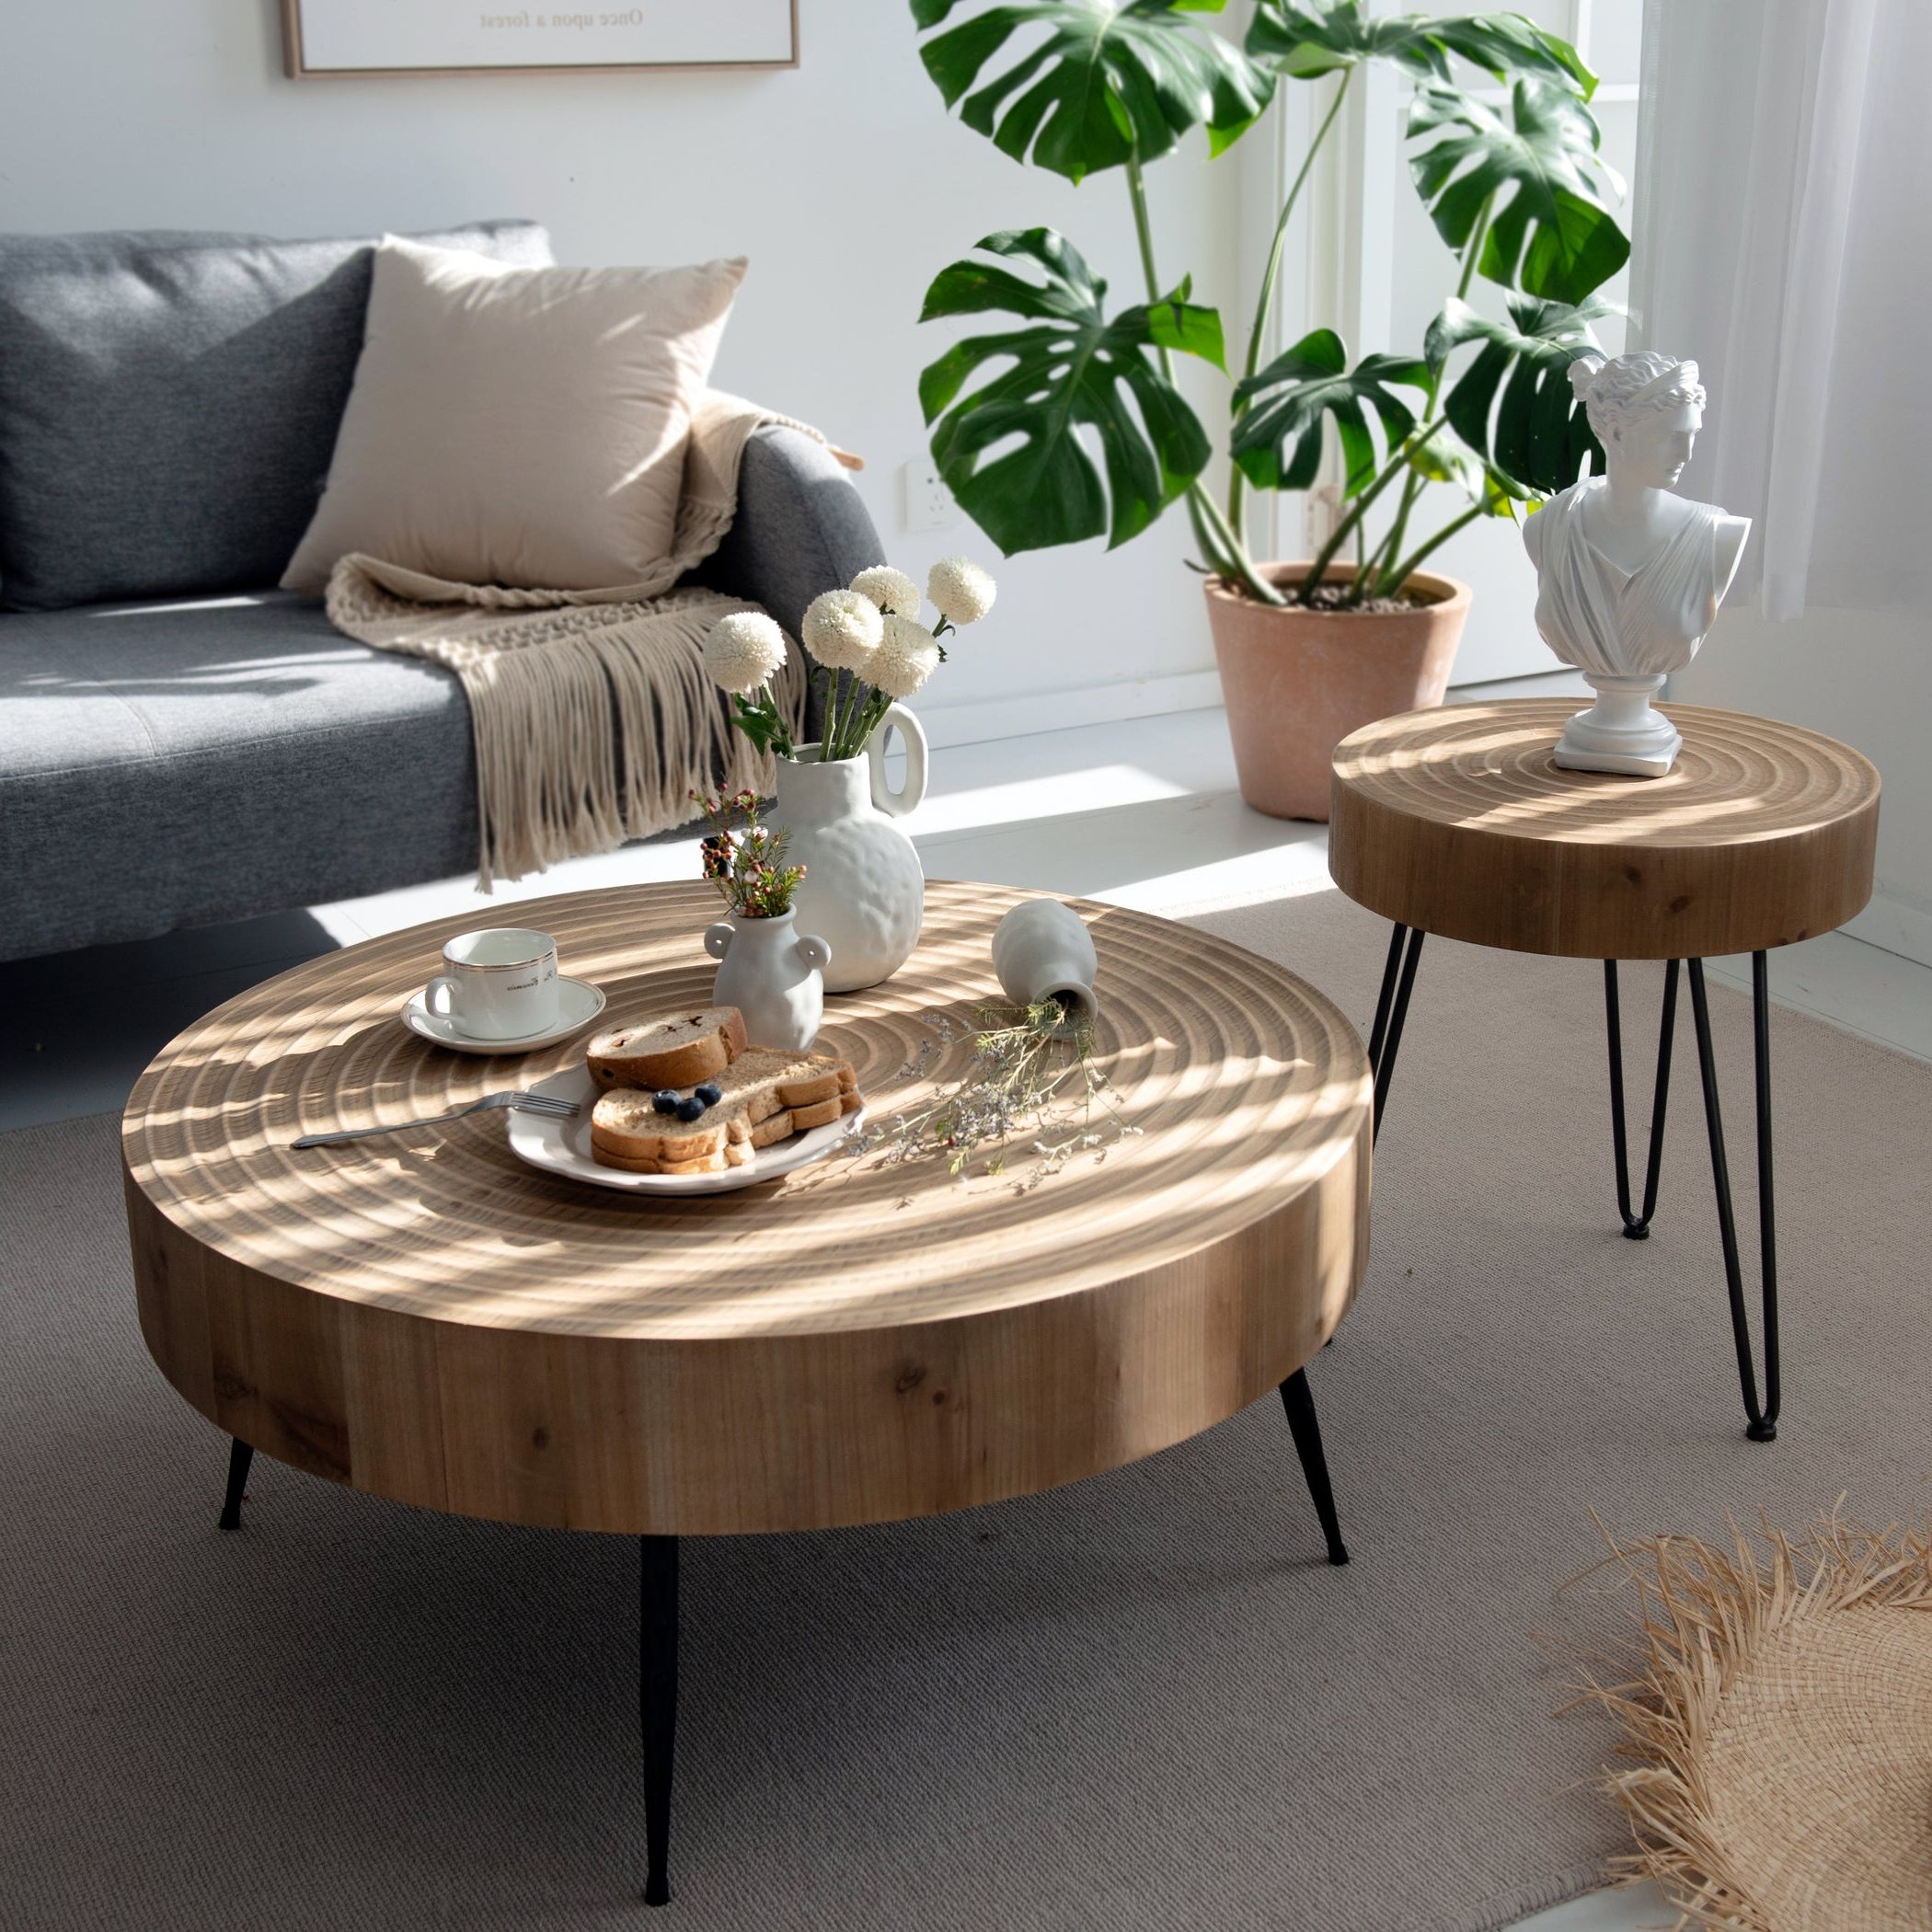 Cozayh 2 Piece Modern Farmhouse Living Room Coffee Table Set, Round With Regard To Latest Modern Farmhouse Coffee Table Sets (View 4 of 15)